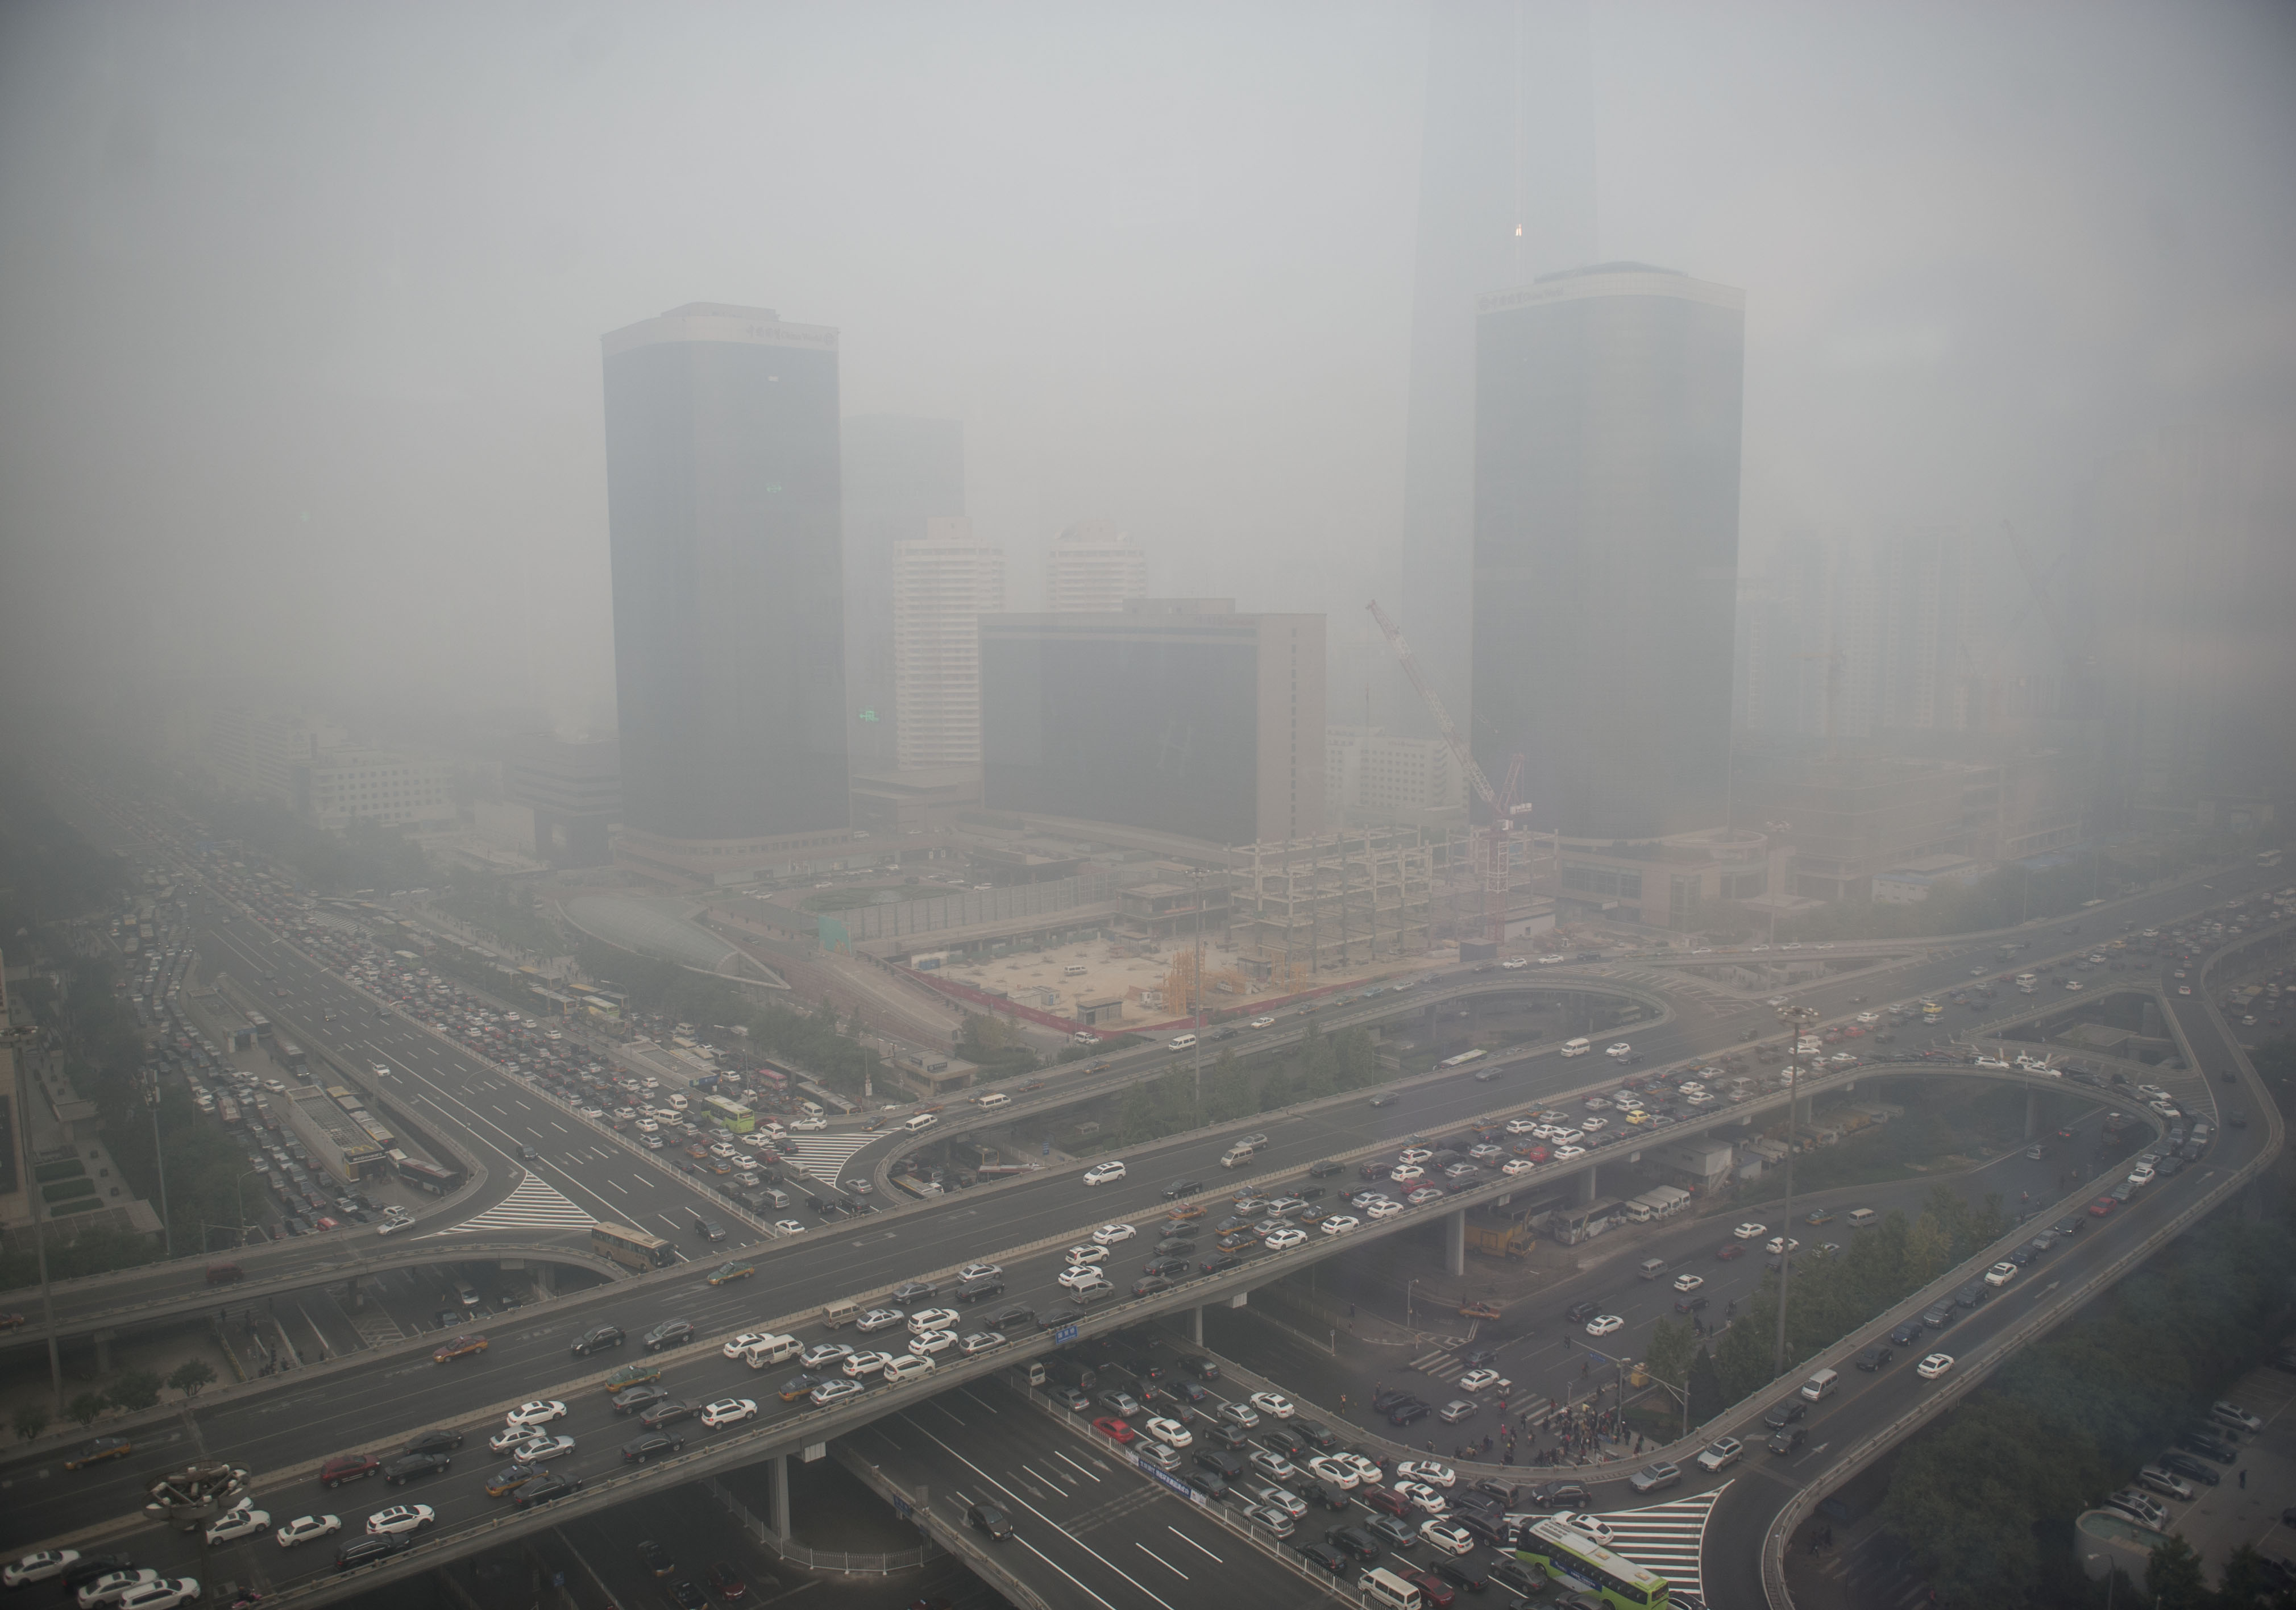 Smog shrouded buildings and streets in Beijing, China. Photo: Xinhua